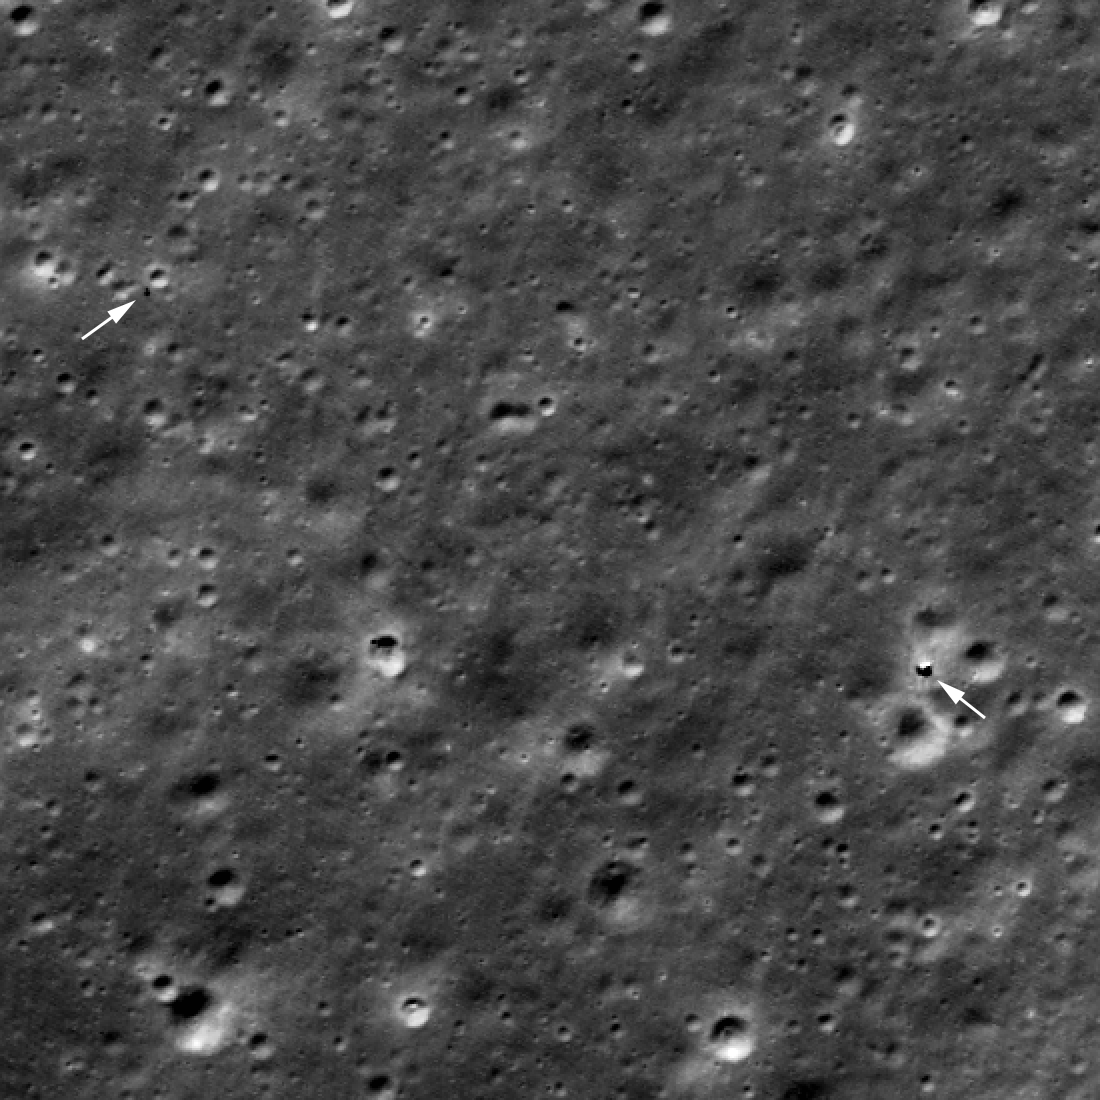 Recent image of Chang'e 4 landr and Yutu rover (enlarged 2x)